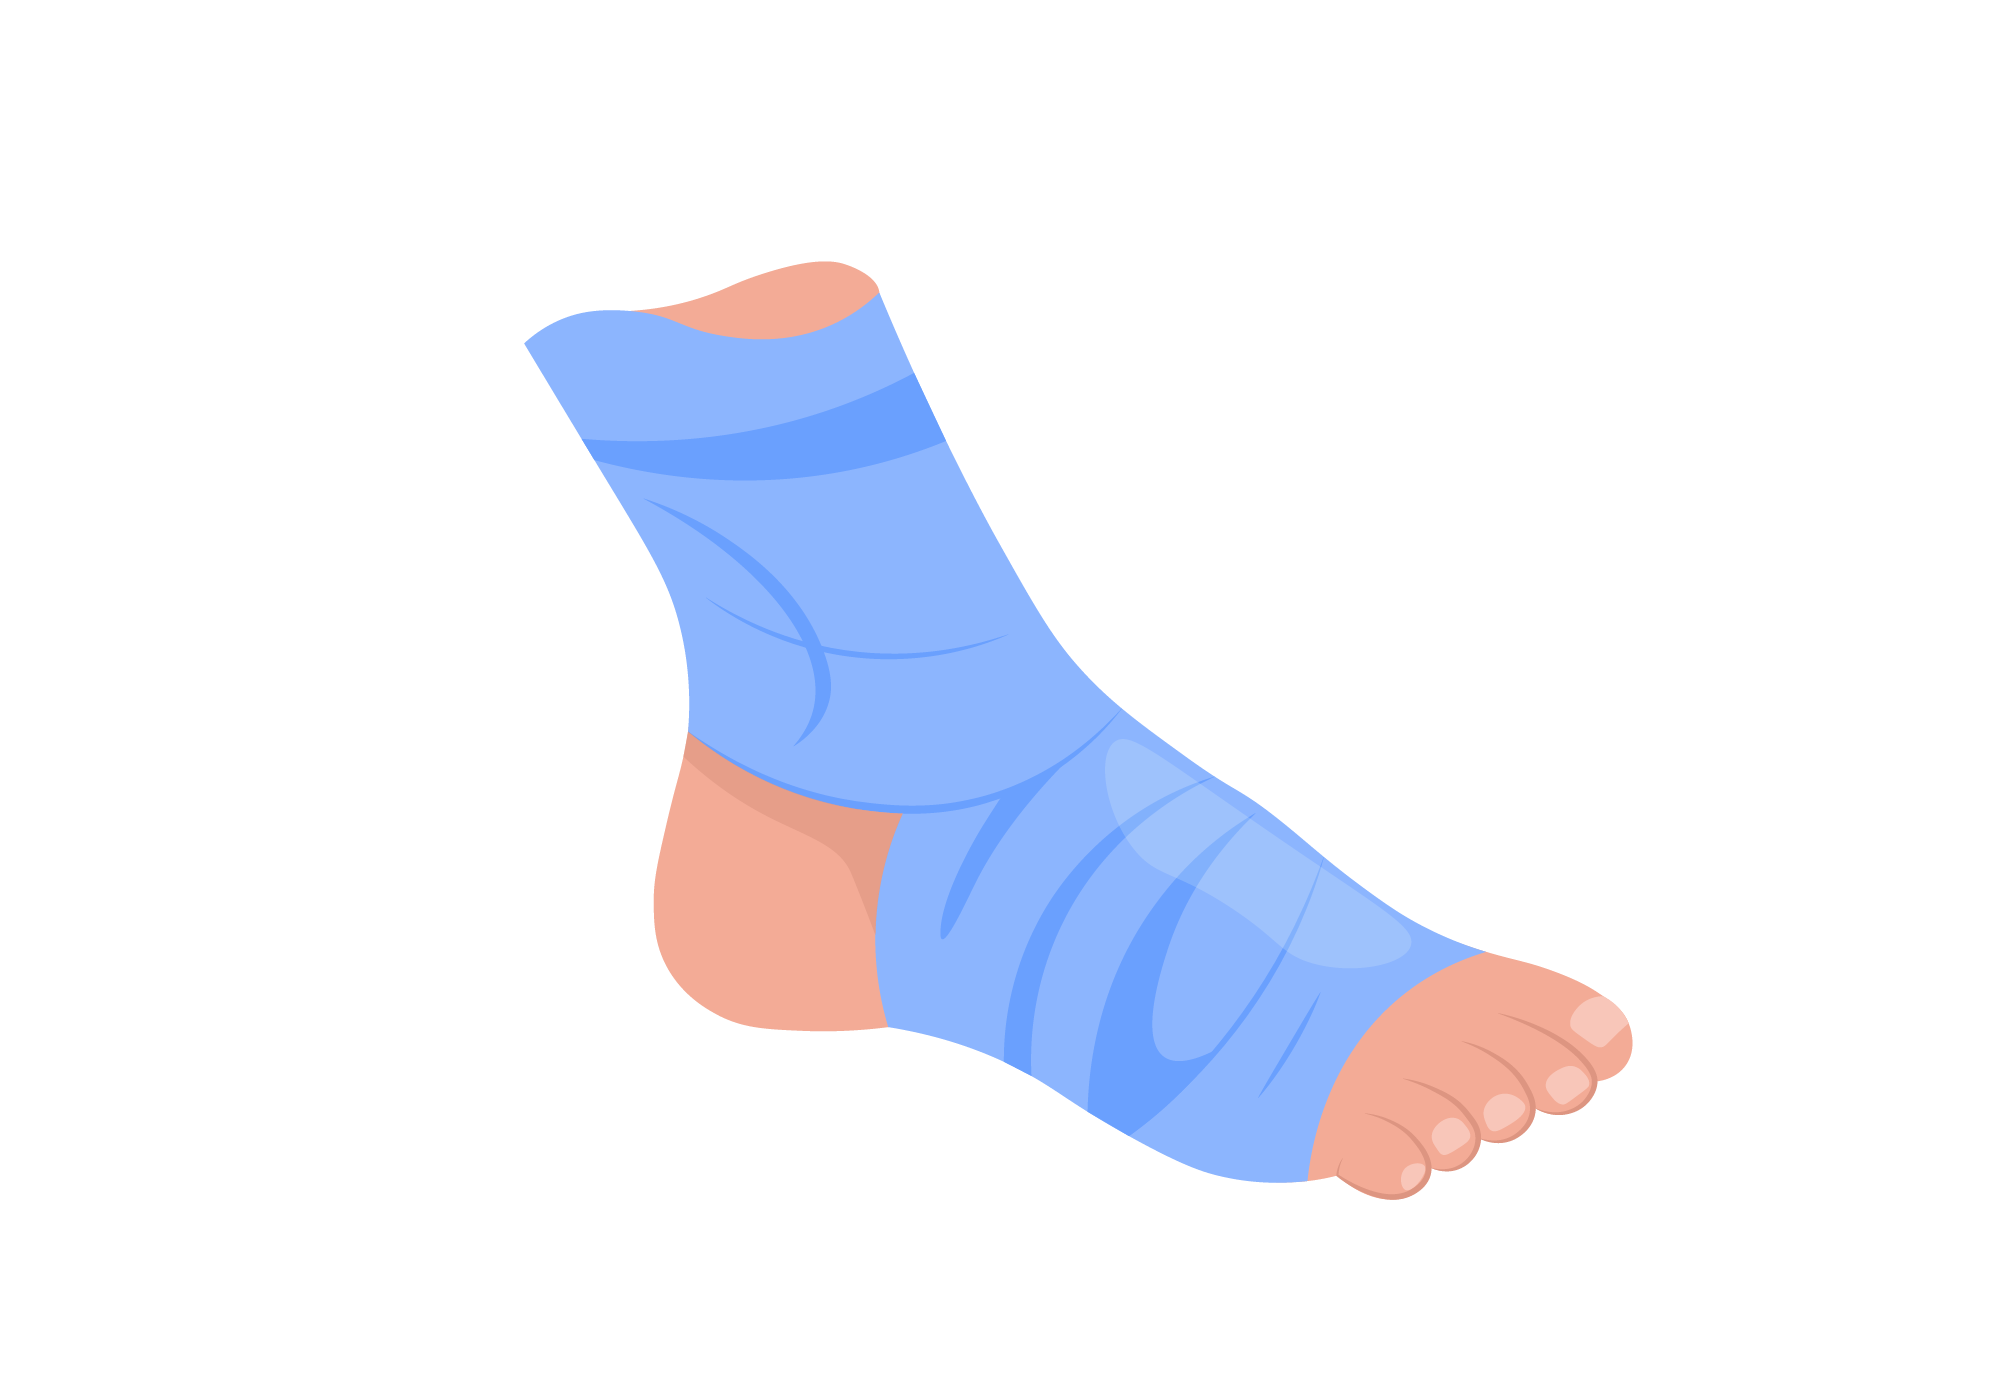 Diagnosing Your Foot Injury: When to See a Doctor - Heiden Orthopedics